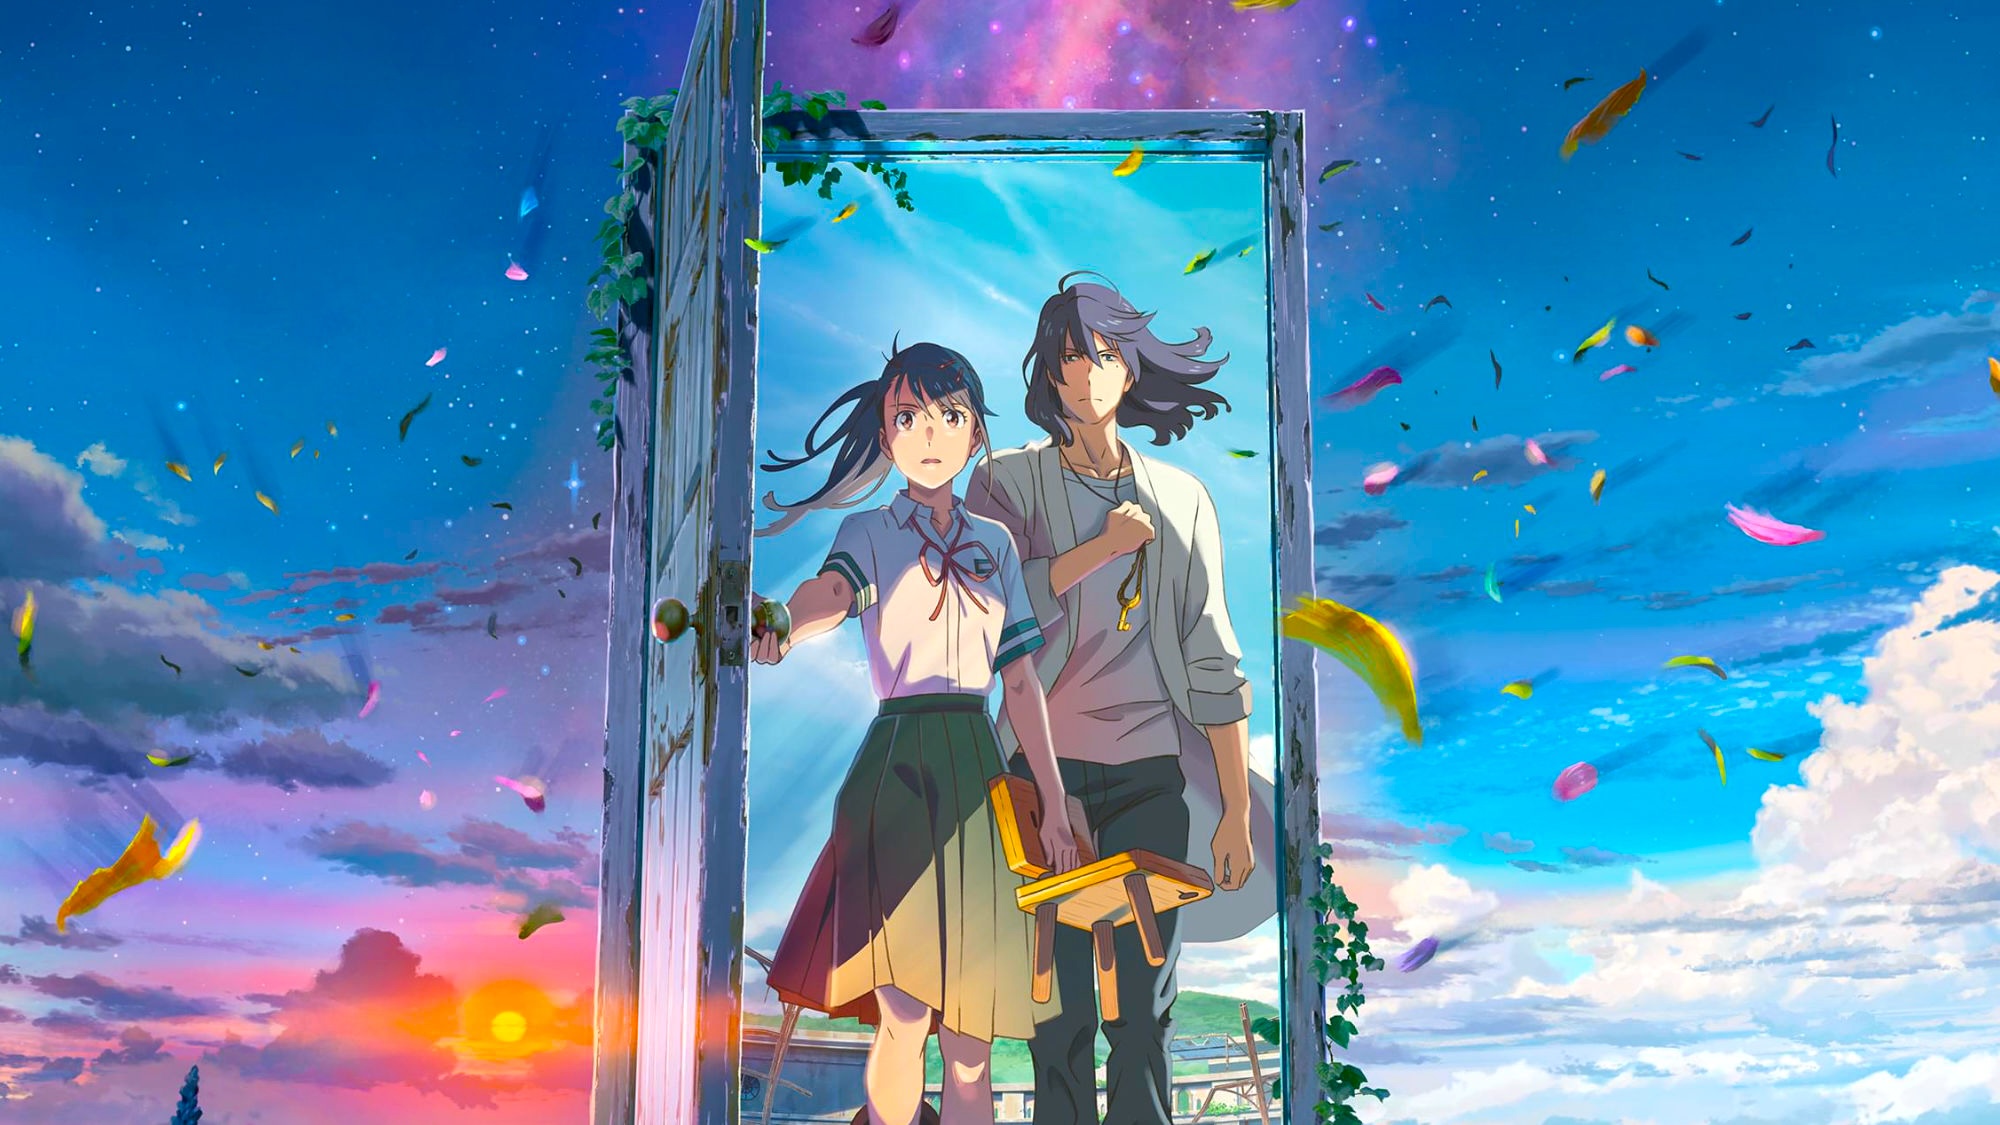 'Suzume', by Makoto Shinkai, now available on streaming: where to watch it